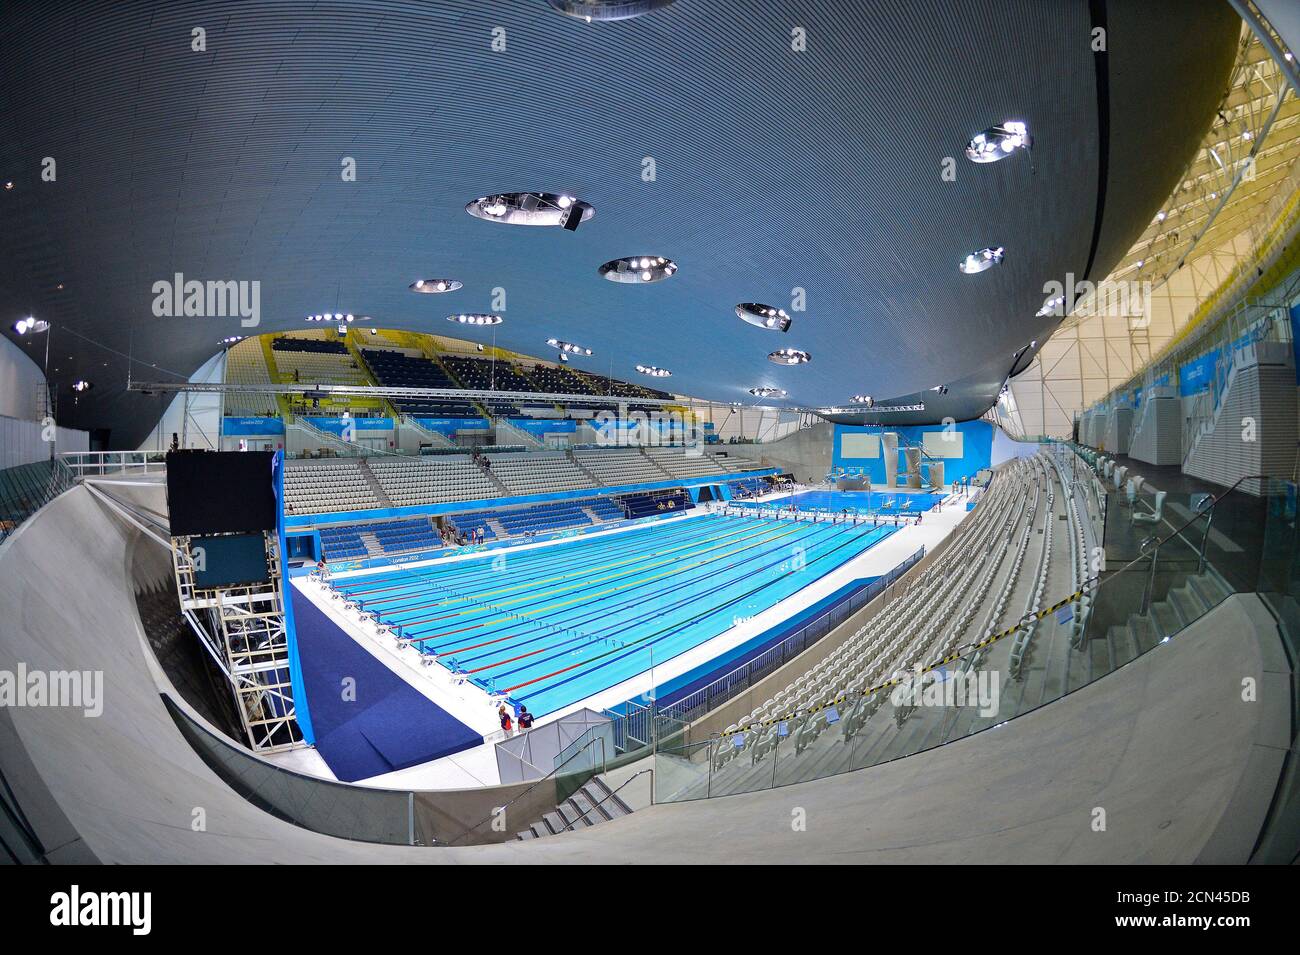 A general view is seen of the Aquatics Centre at the Olympic Park in Stratford, the location of the London 2012 Olympic Games, in east London July 19, 2012. REUTERS/Toby Melville (BRITAIN - Tags: SPORT SWIMMING OLYMPICS) Stock Photo